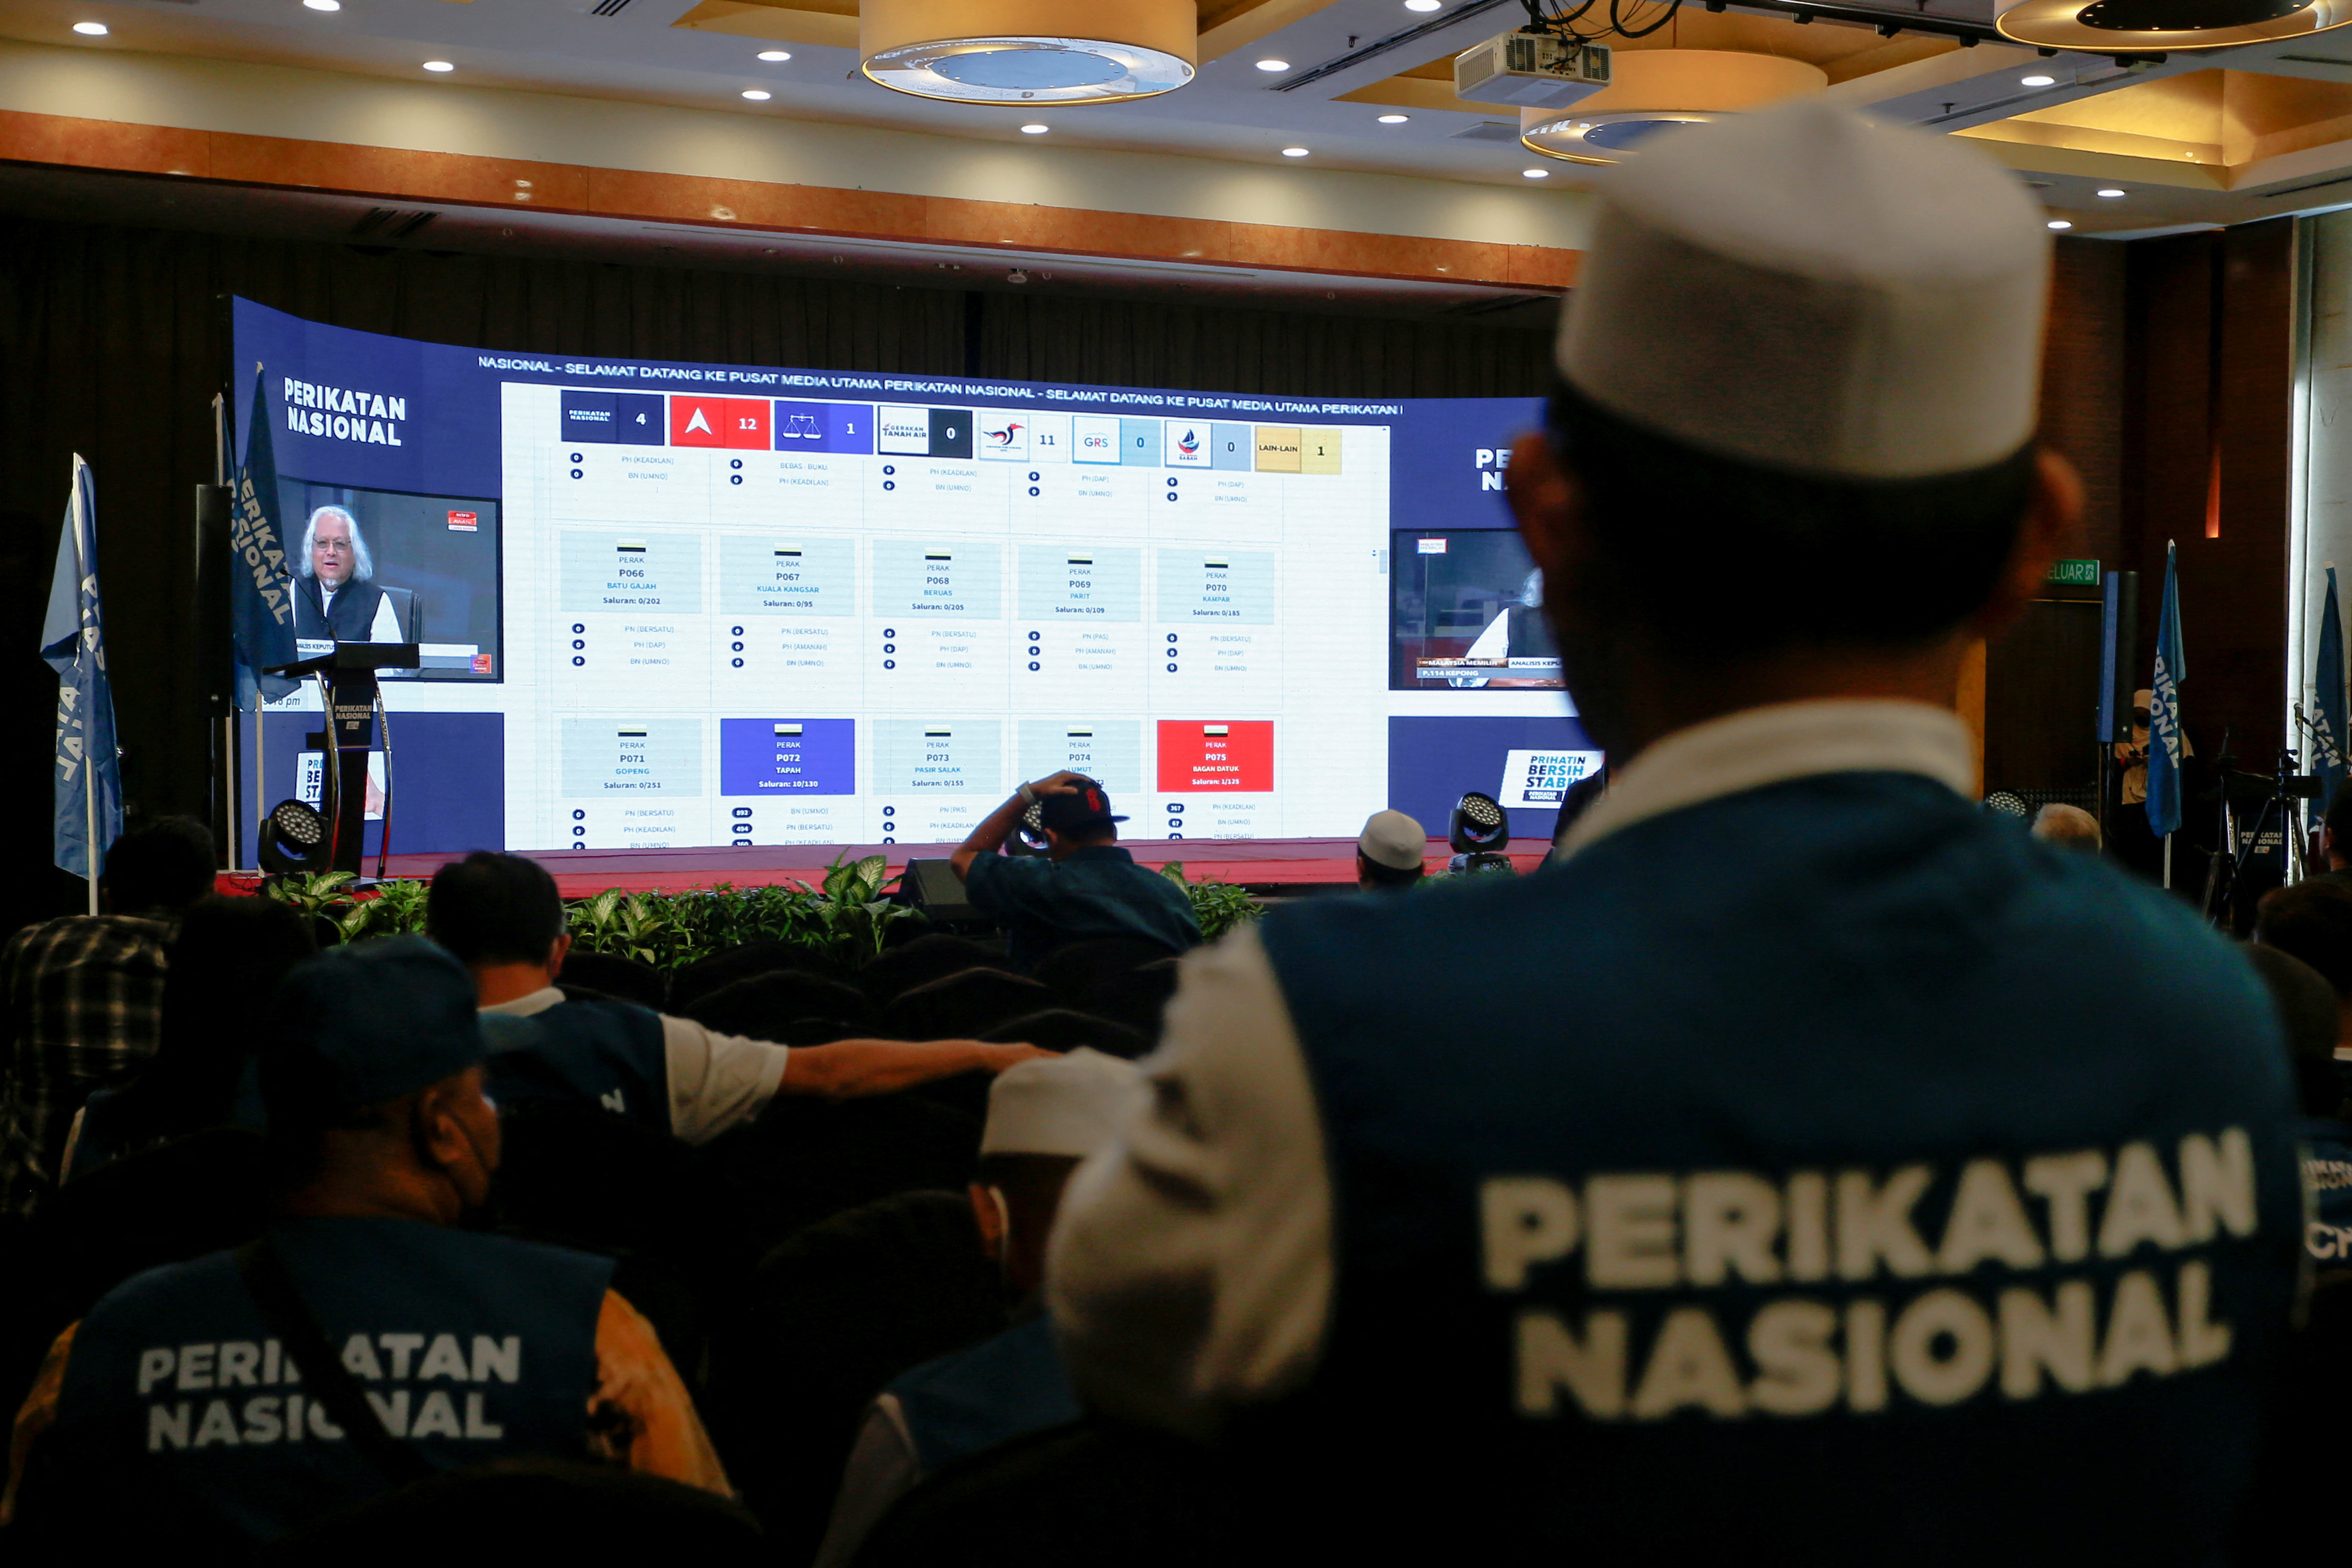 Supporters of Perikatan Nasional watch a video stream for live results of Malaysia's 15th general election at a hotel in Shah Alam